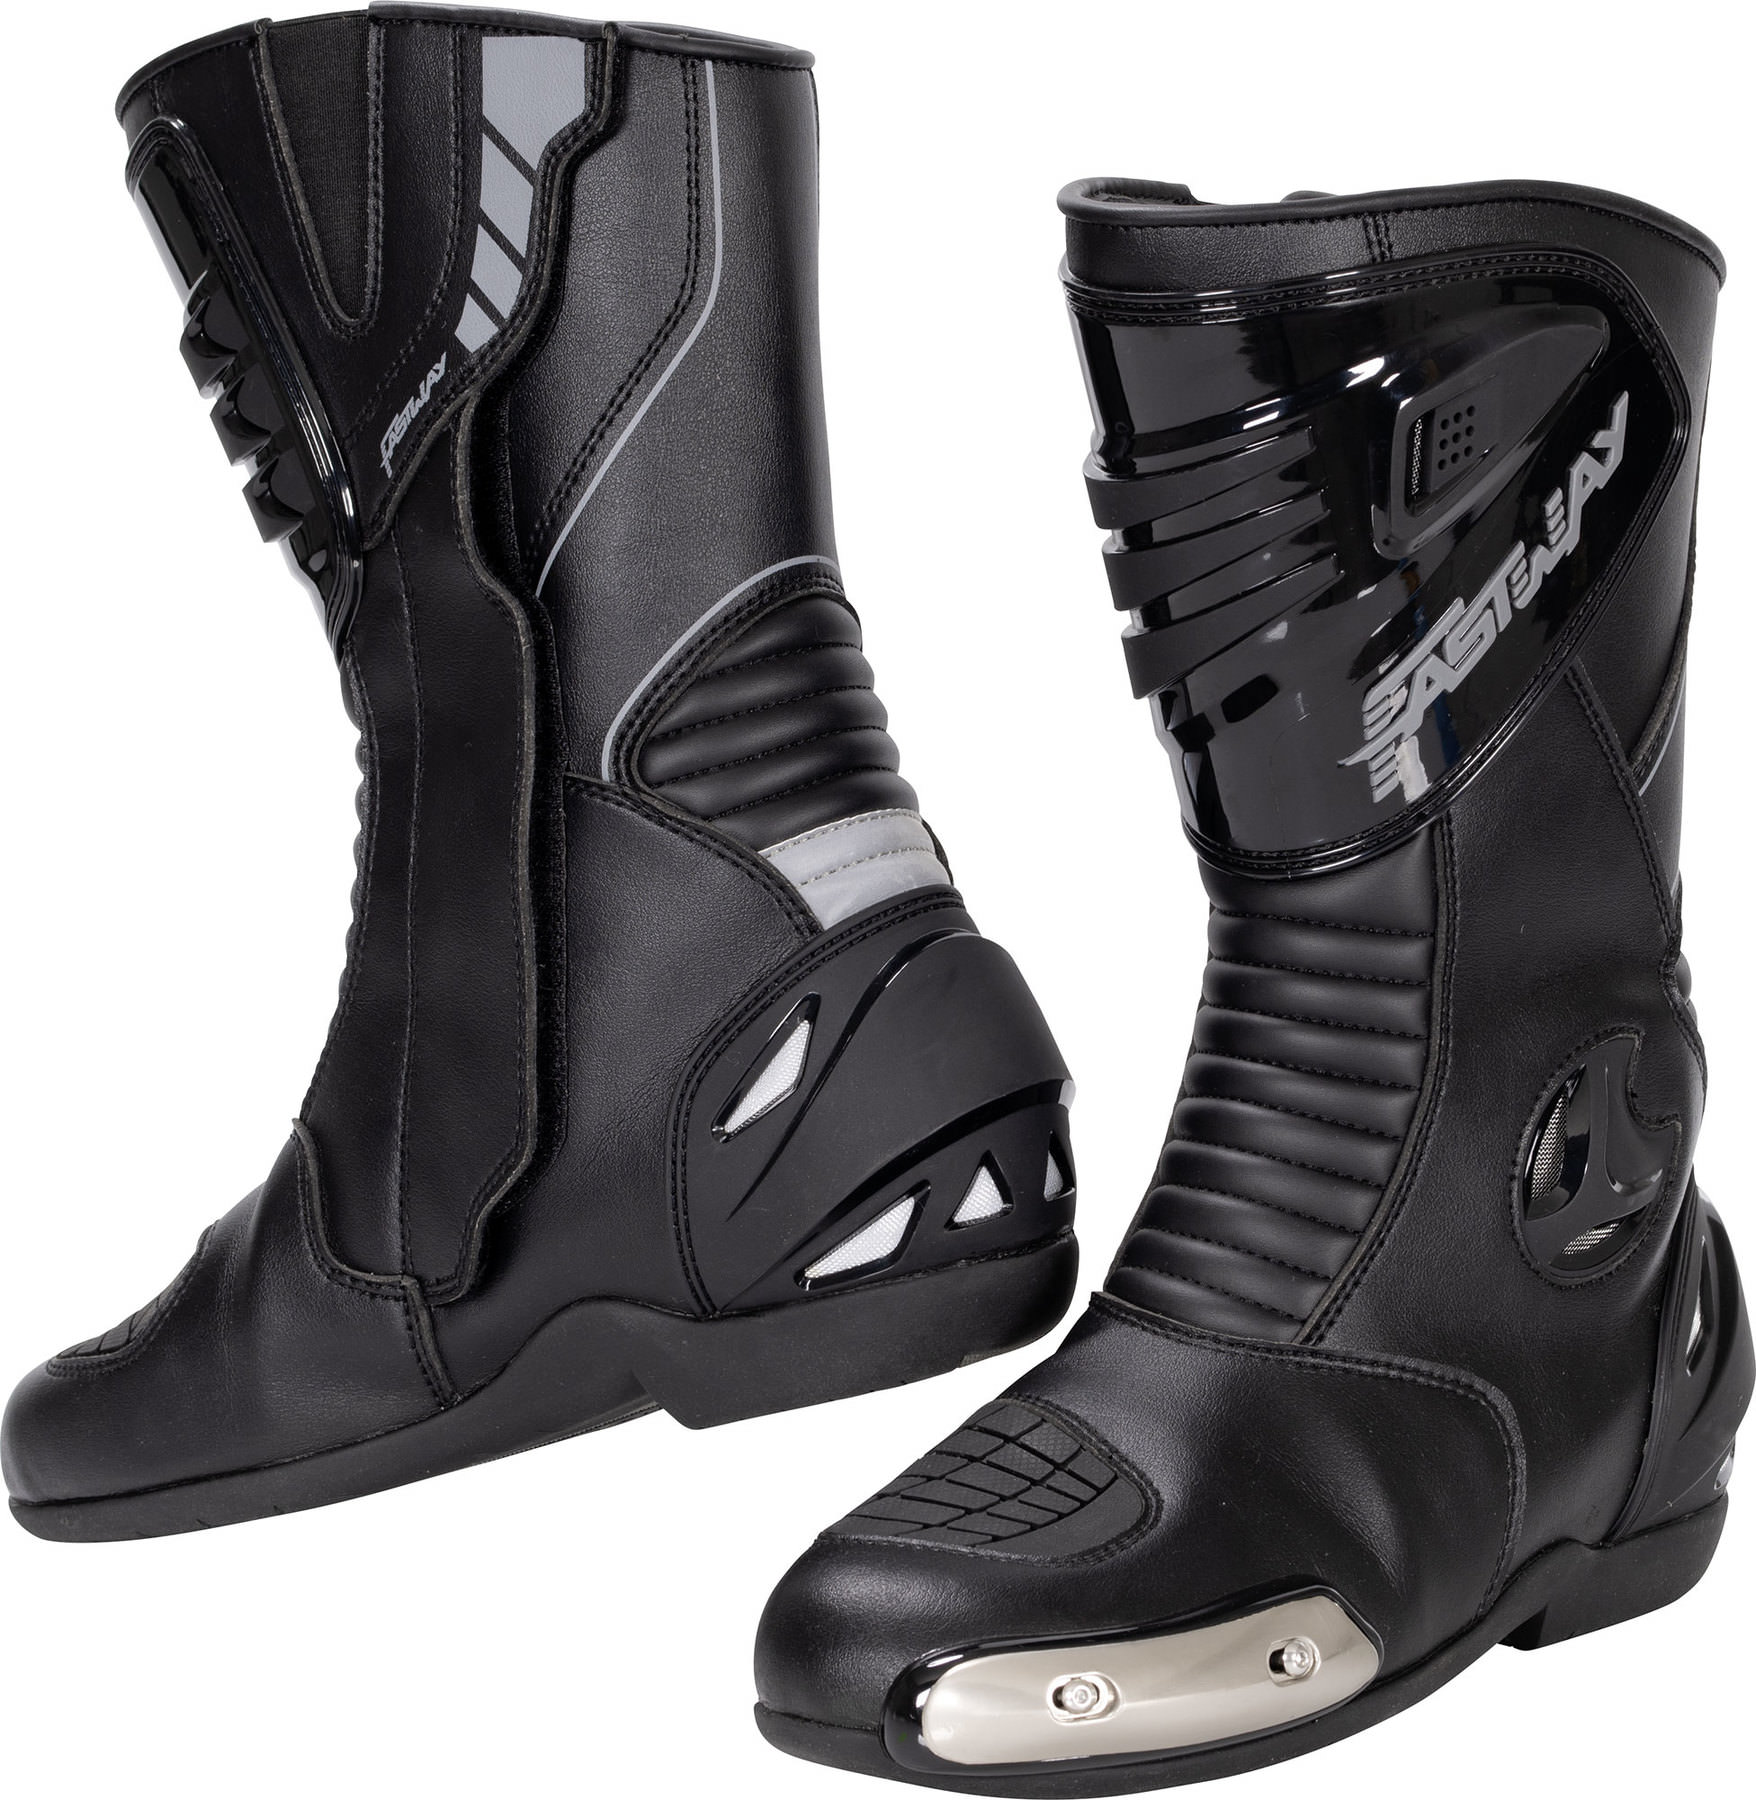 Buy Fastway FRS-1 Racing Boot | Louis motorcycle clothing and technology